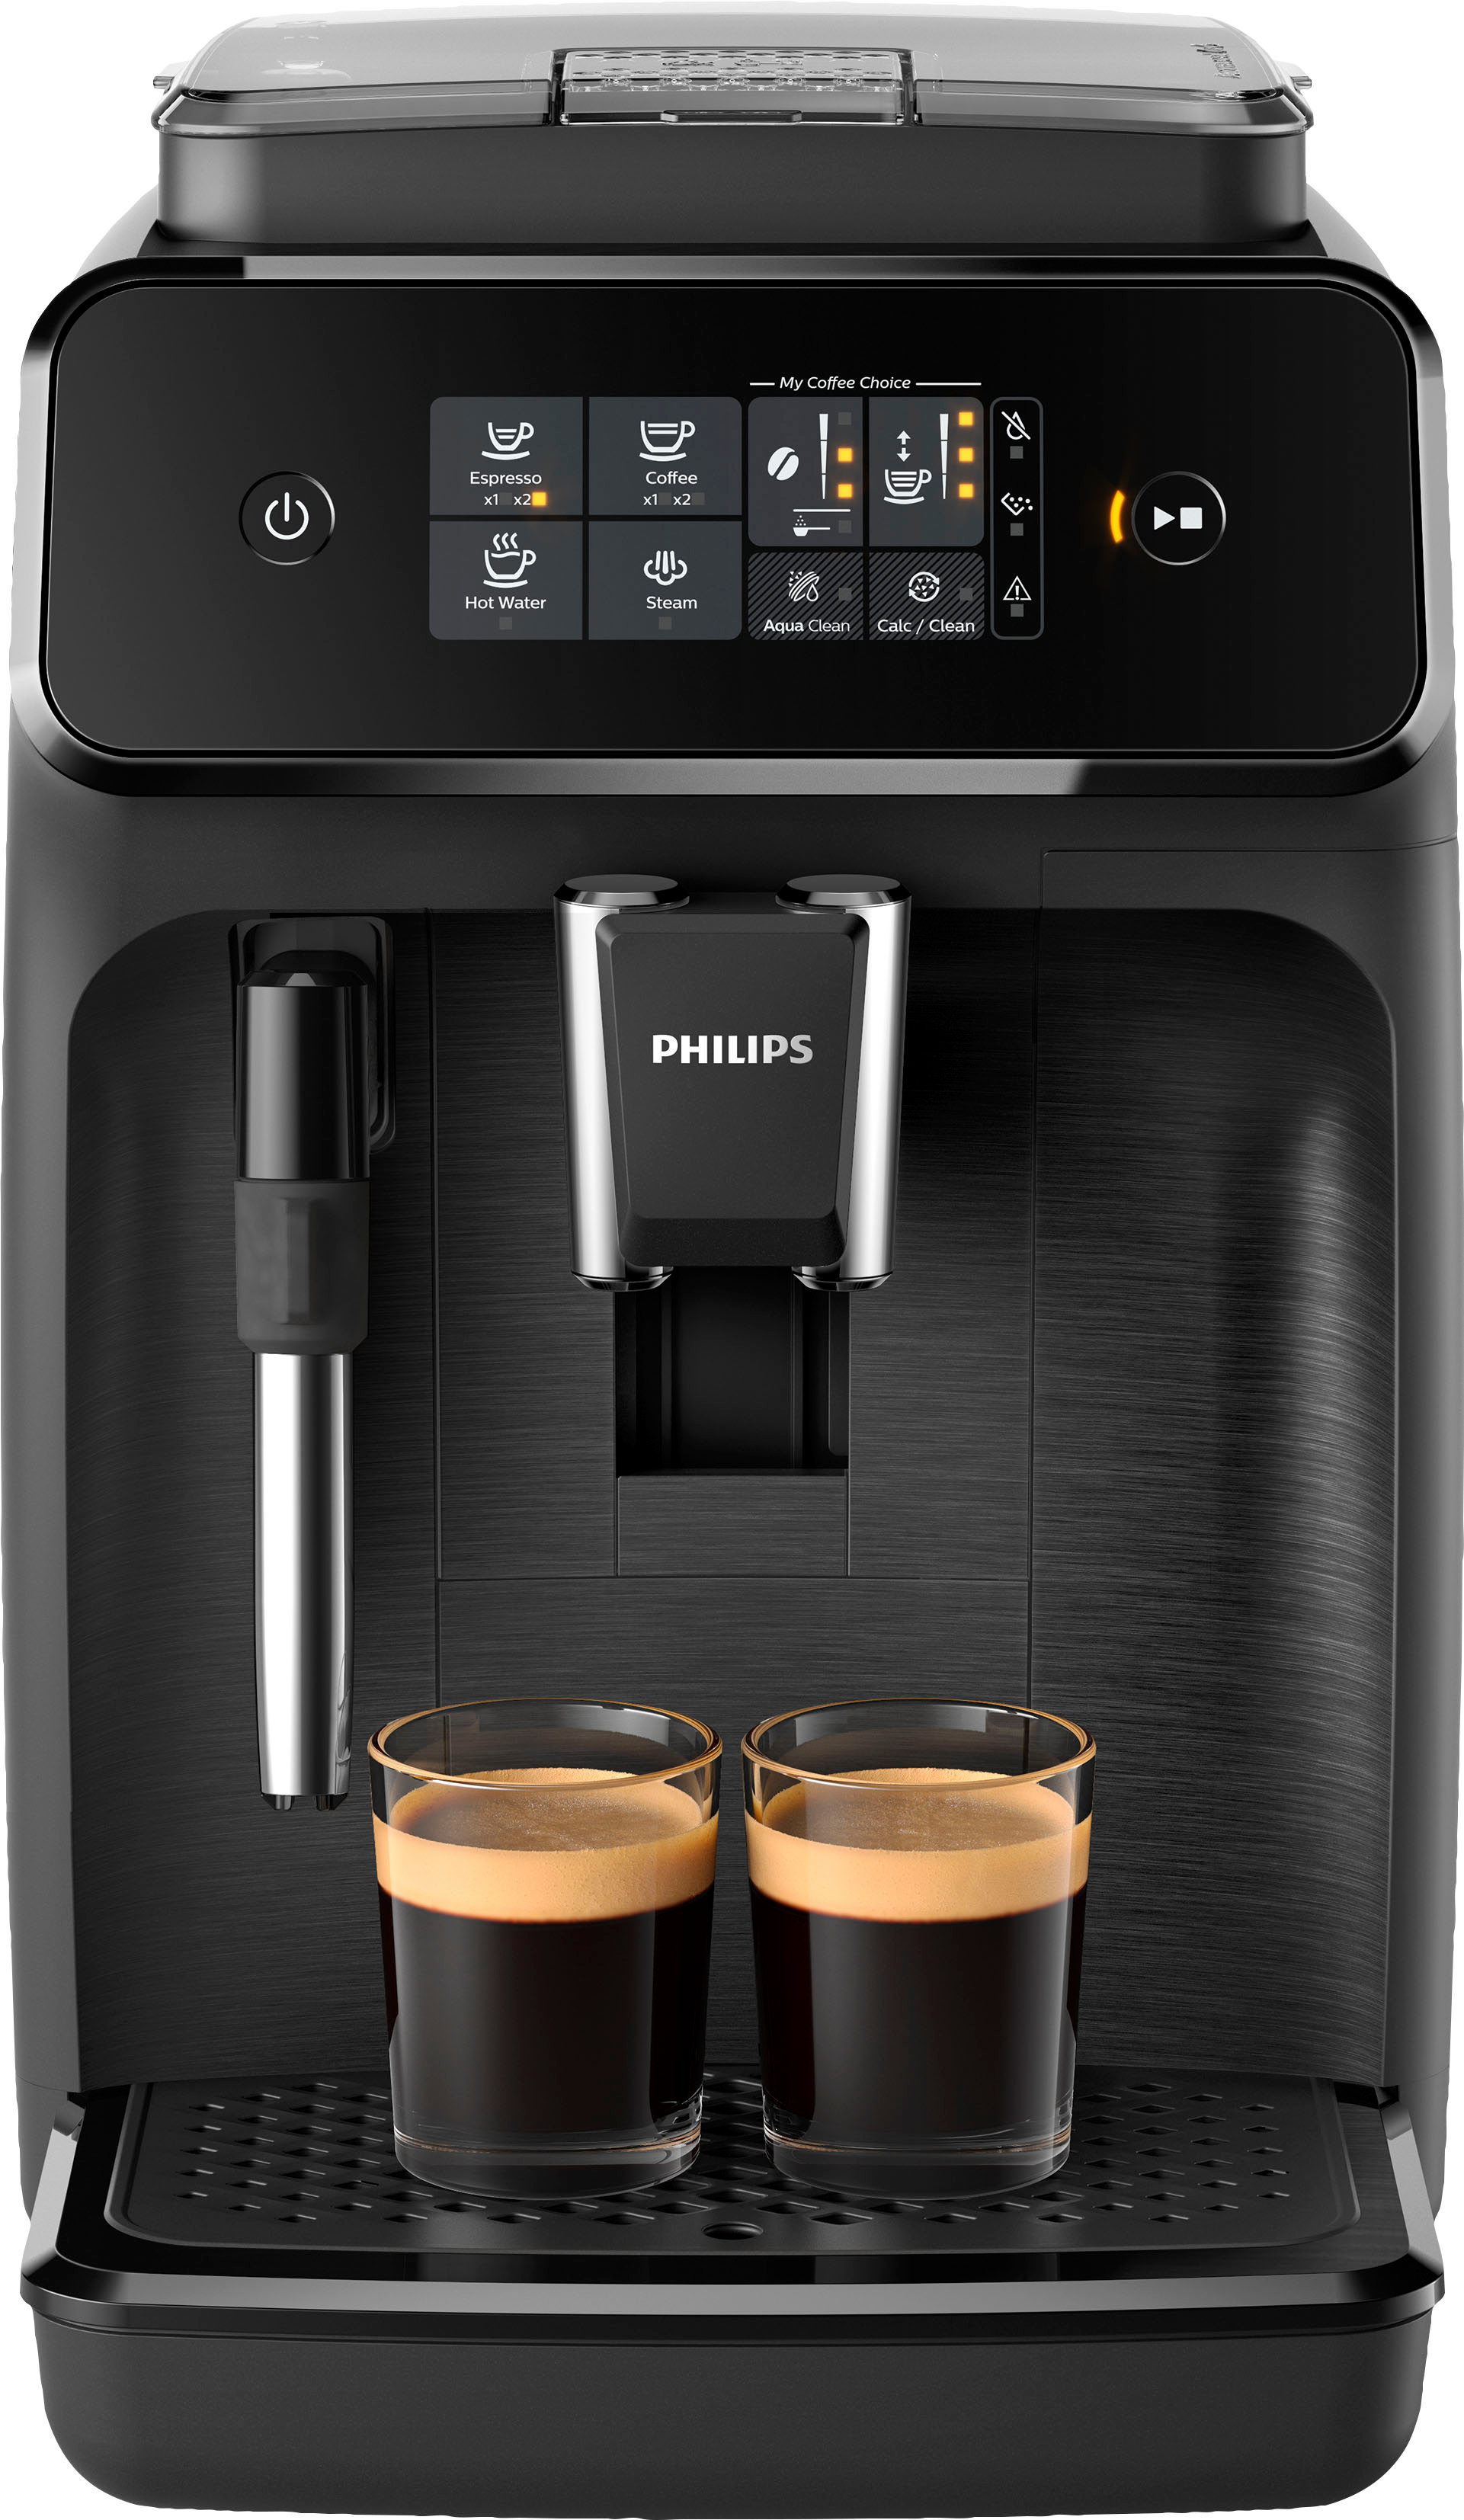 Promote Persistence Unfair Philips 1200 Series Fully Automatic Espresso Machine with Milk Frother  Black EP1220/04 - Best Buy